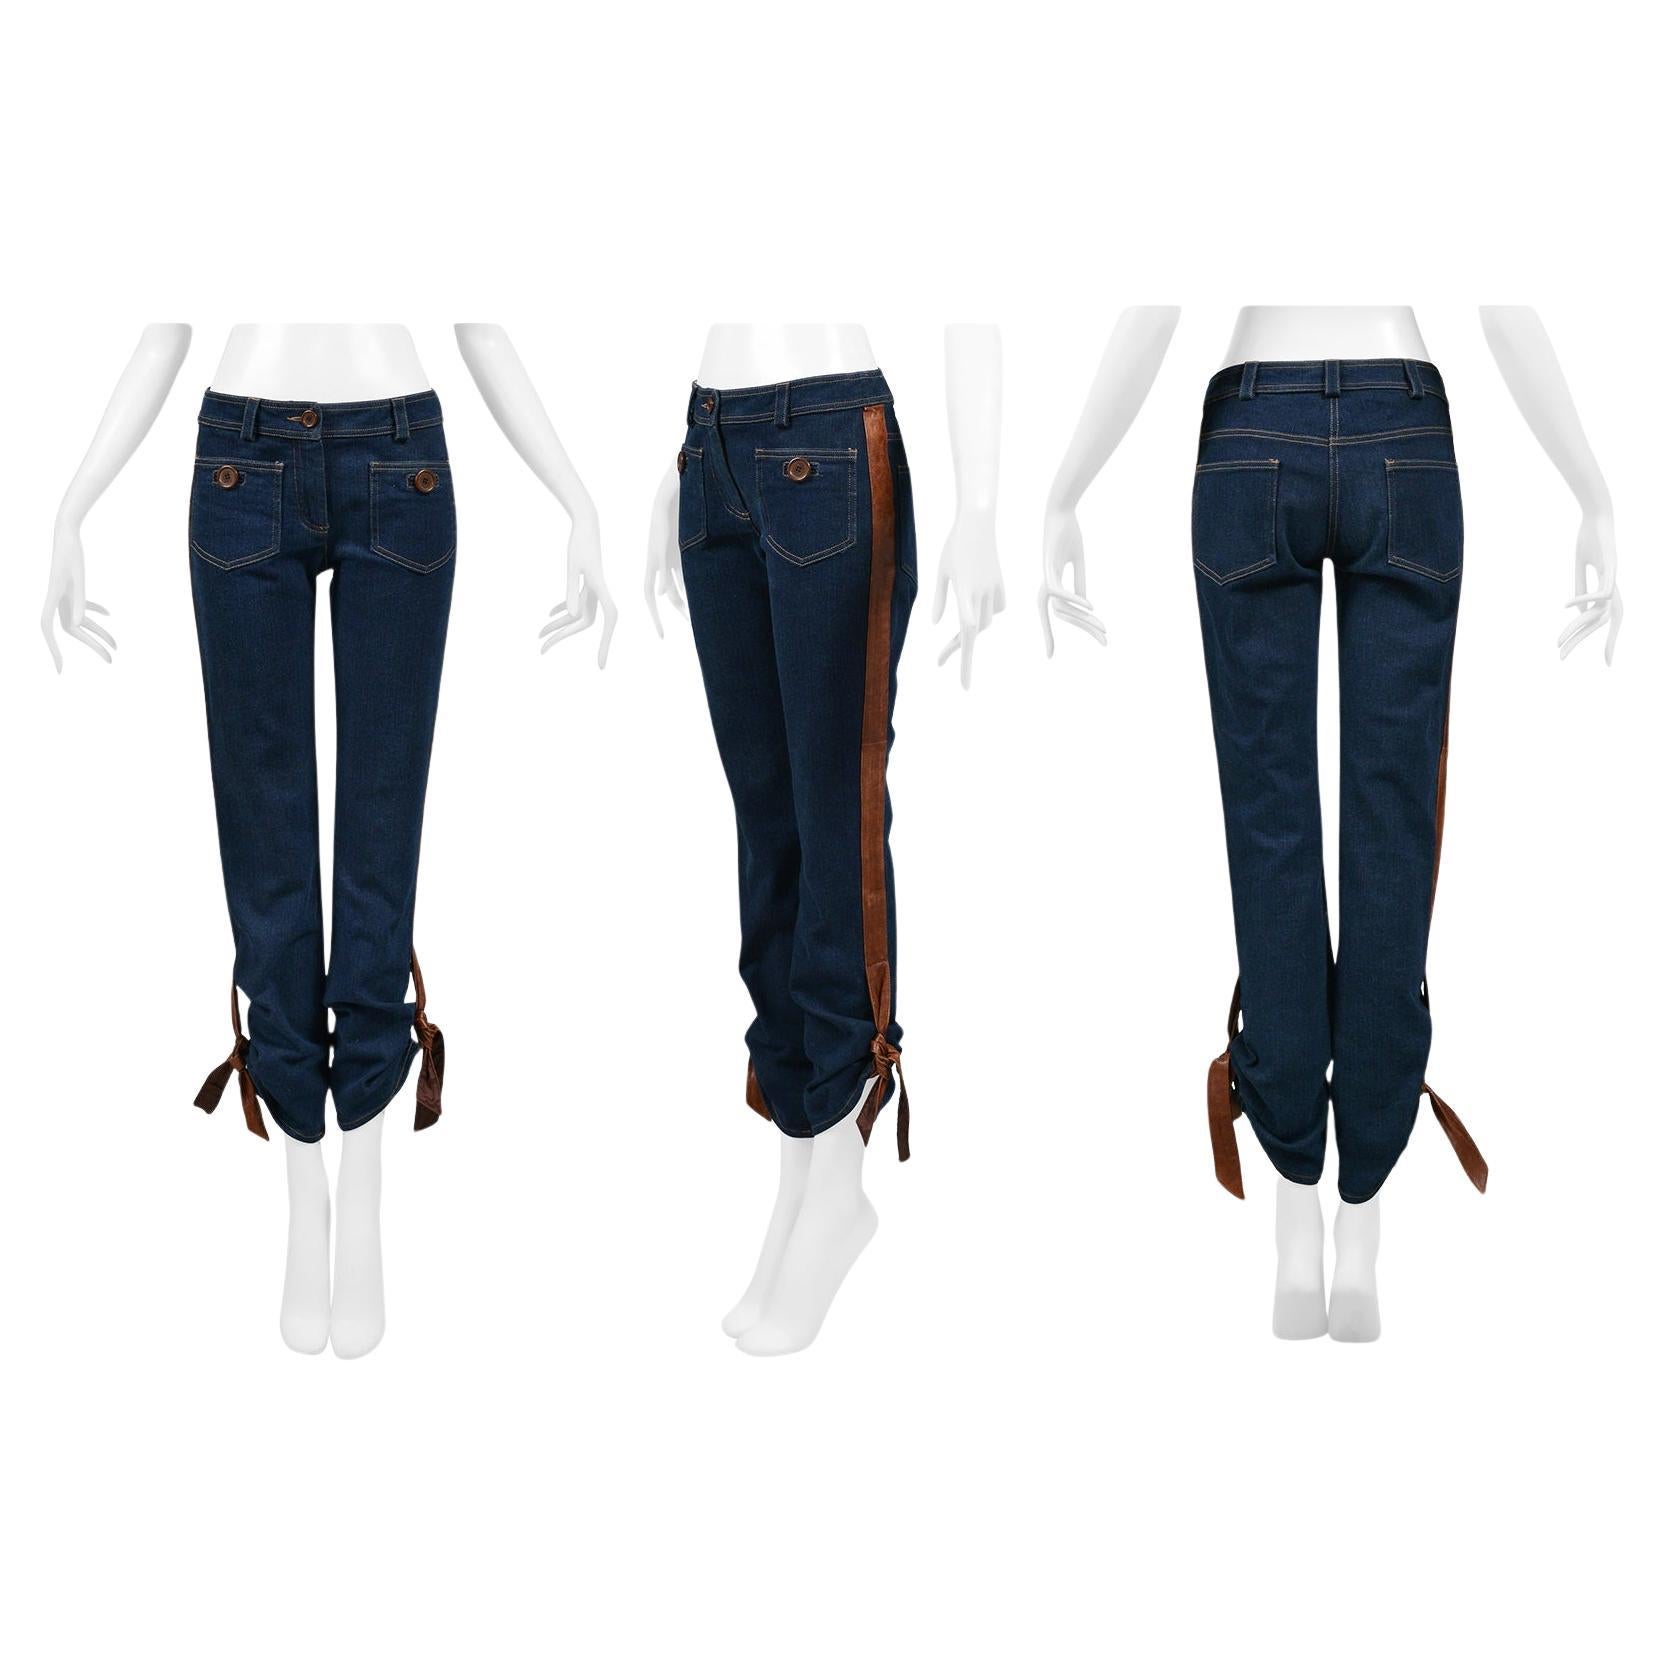 Christian Dior Blue Denim Jeans With Leather Trim & Ties 2005 For Sale